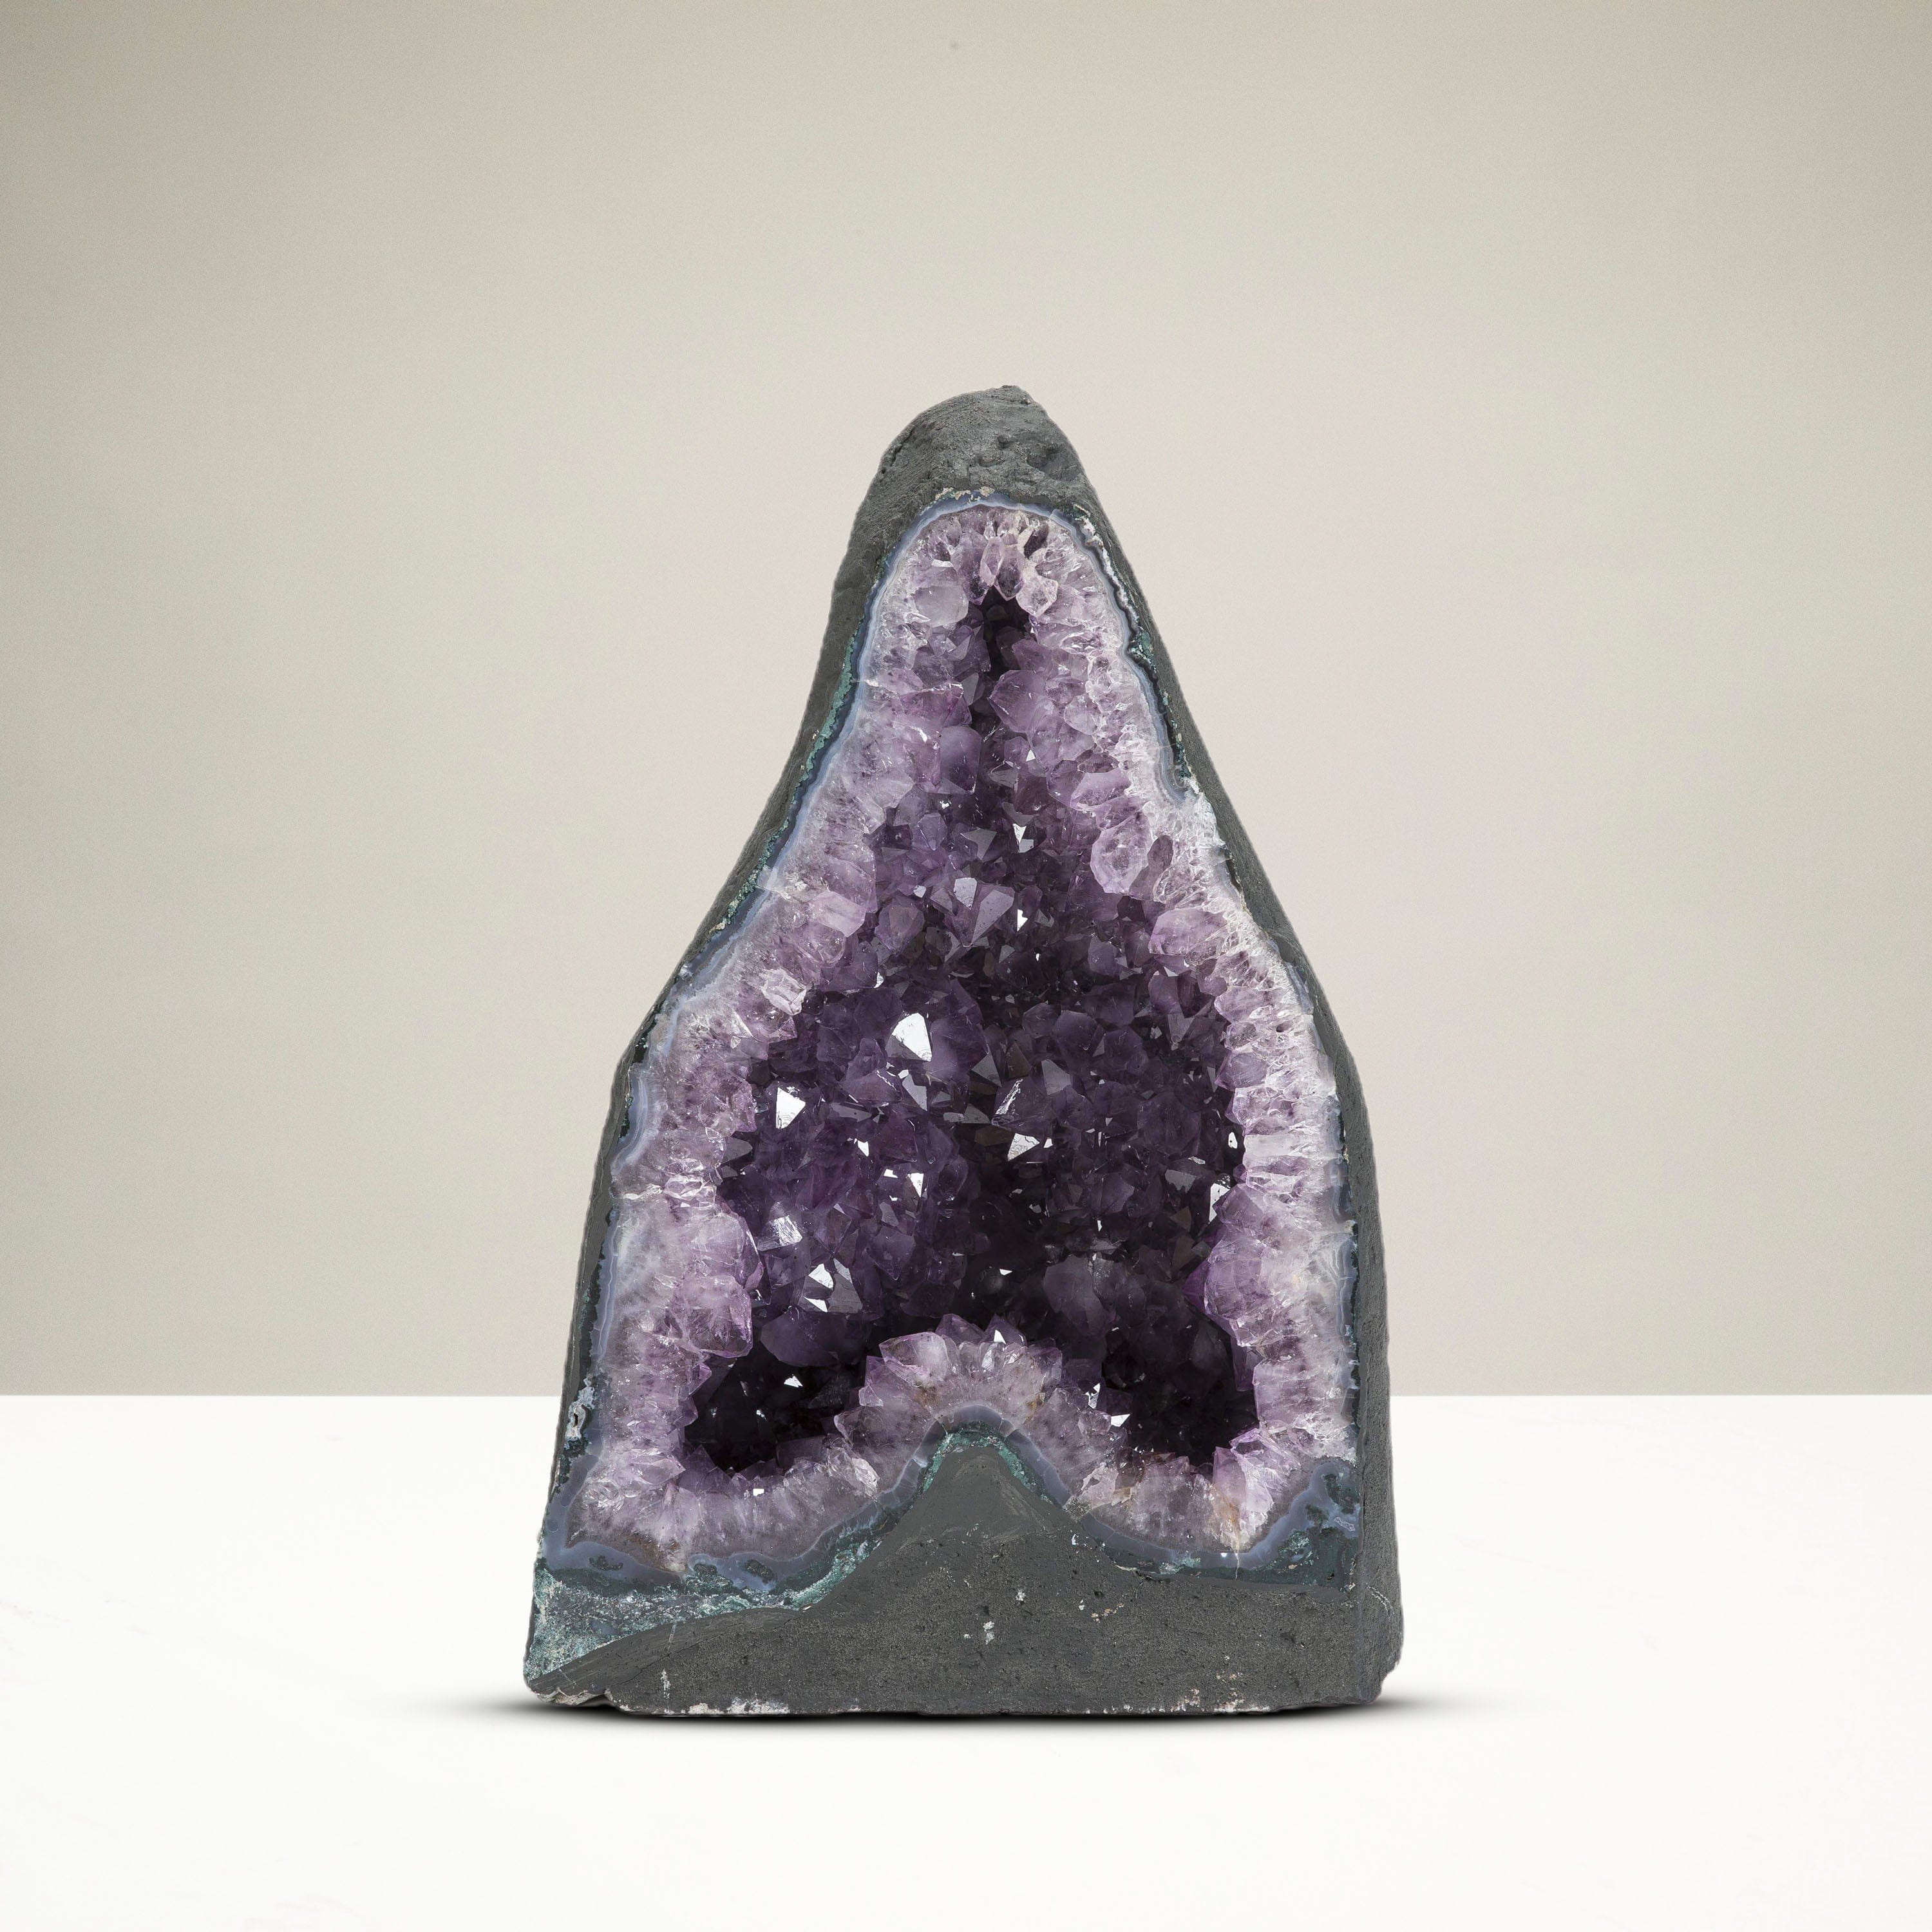 Kalifano Amethyst Natural Brazilian Amethyst Geode Cathedral - 19 in / 88 lbs BAG8200.001